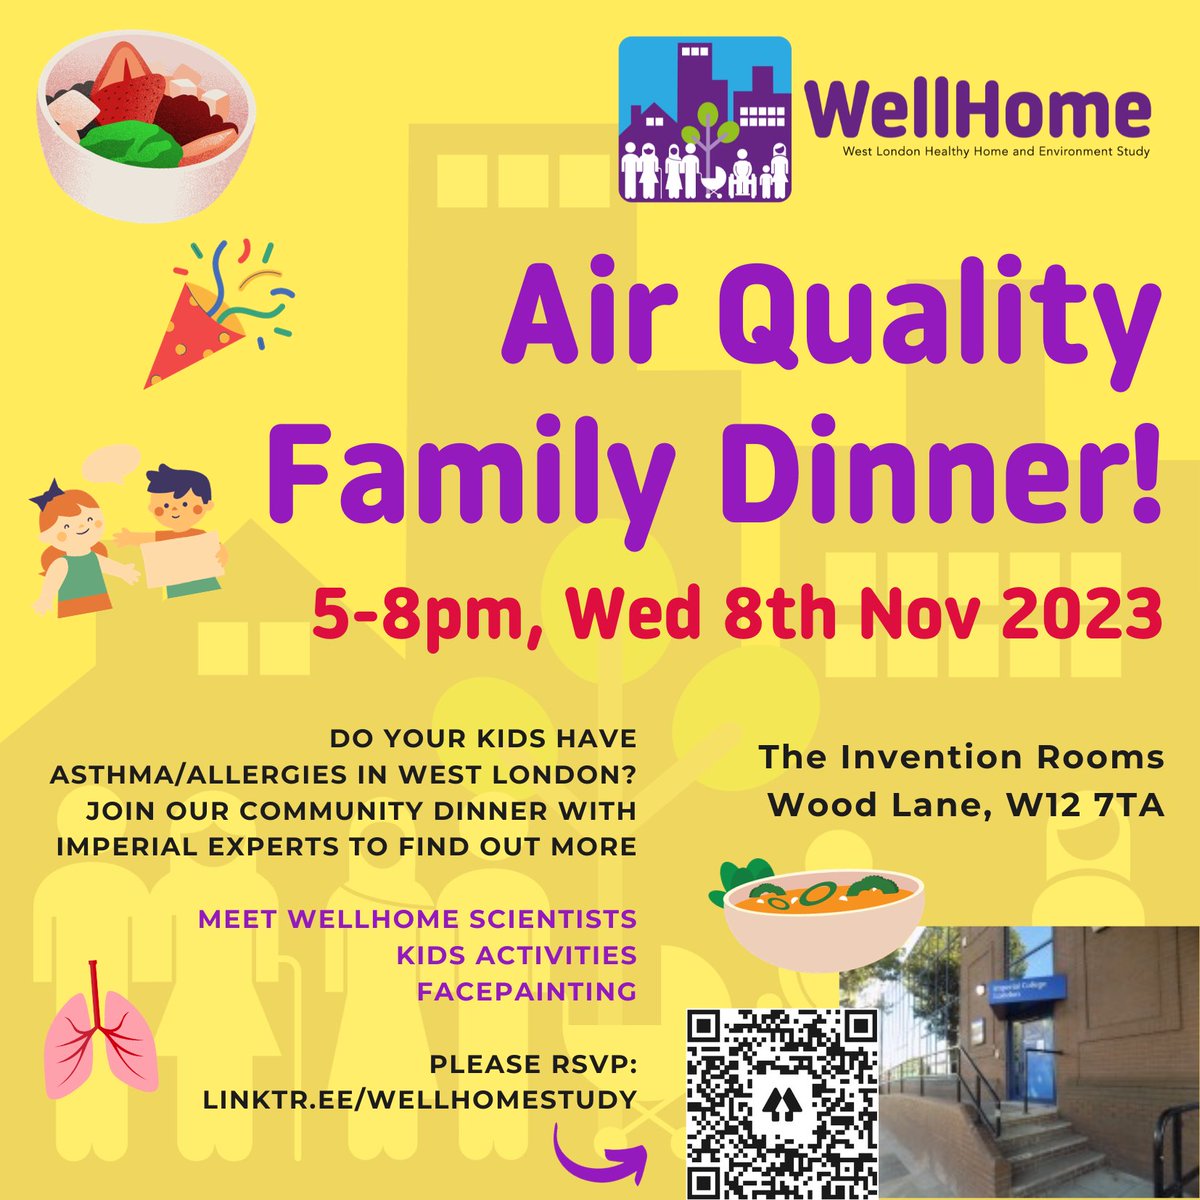 🫁 Just 5 days until our WellHome Family Dinner @InventionRooms! 🎉 On @WorldVentil8Day, celebrate our 1 year anniversary with @ERGImperial scientists, partners & families... 🎨Kids activities 🌬️Ask Qs w/ #Asthma specialists 🥙Yummy food RSVP by 5 Nov: imperial.eu.qualtrics.com/jfe/form/SV_79…